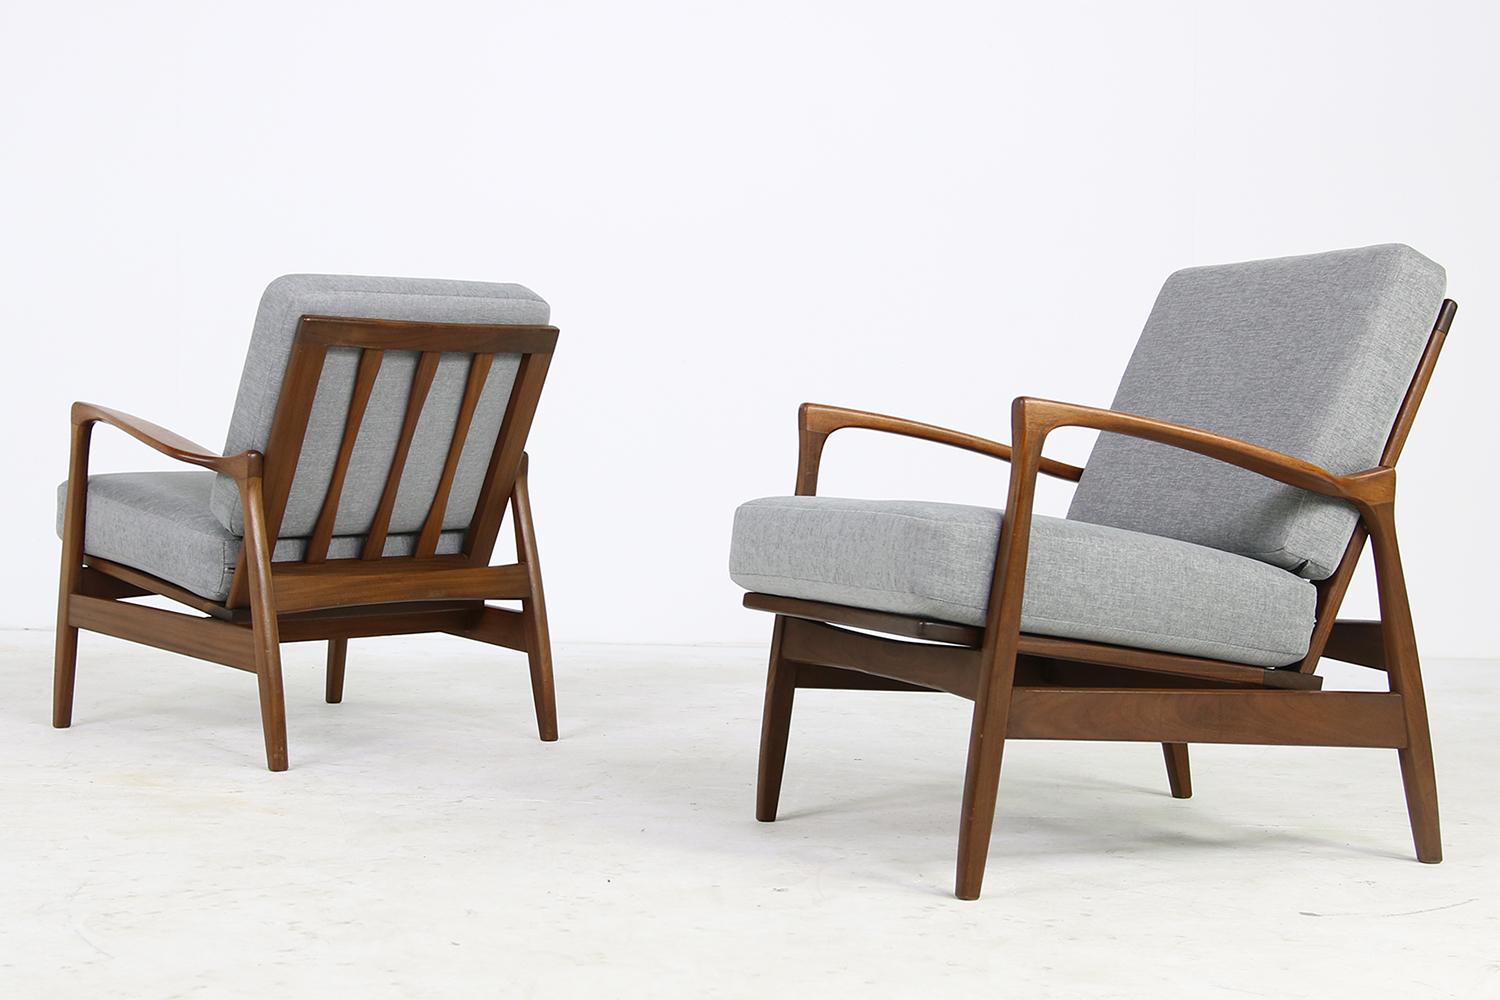 Beautiful pair of 1960s Danish easy chairs, organic shape, new upholstery, covered with new fabric, very rare models, solid wood, fantastic condition, pretty rare pieces.